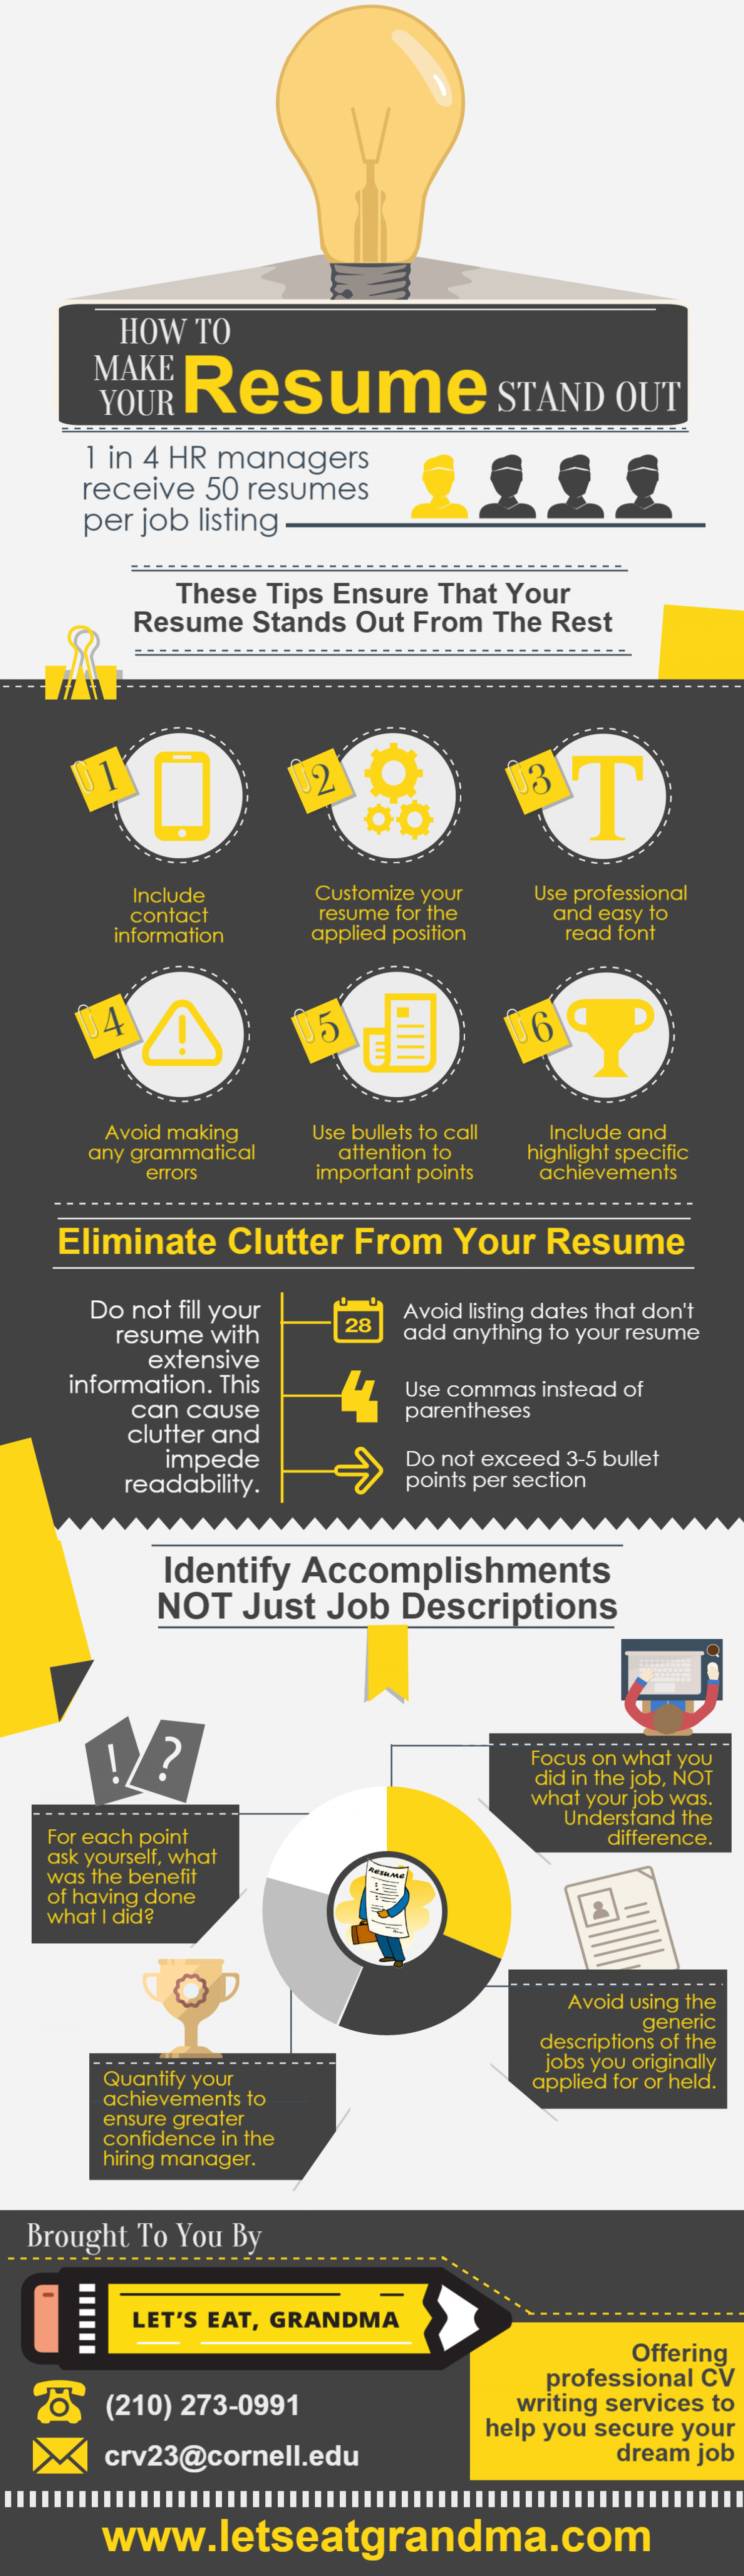 How to make your resume stand out Infographic